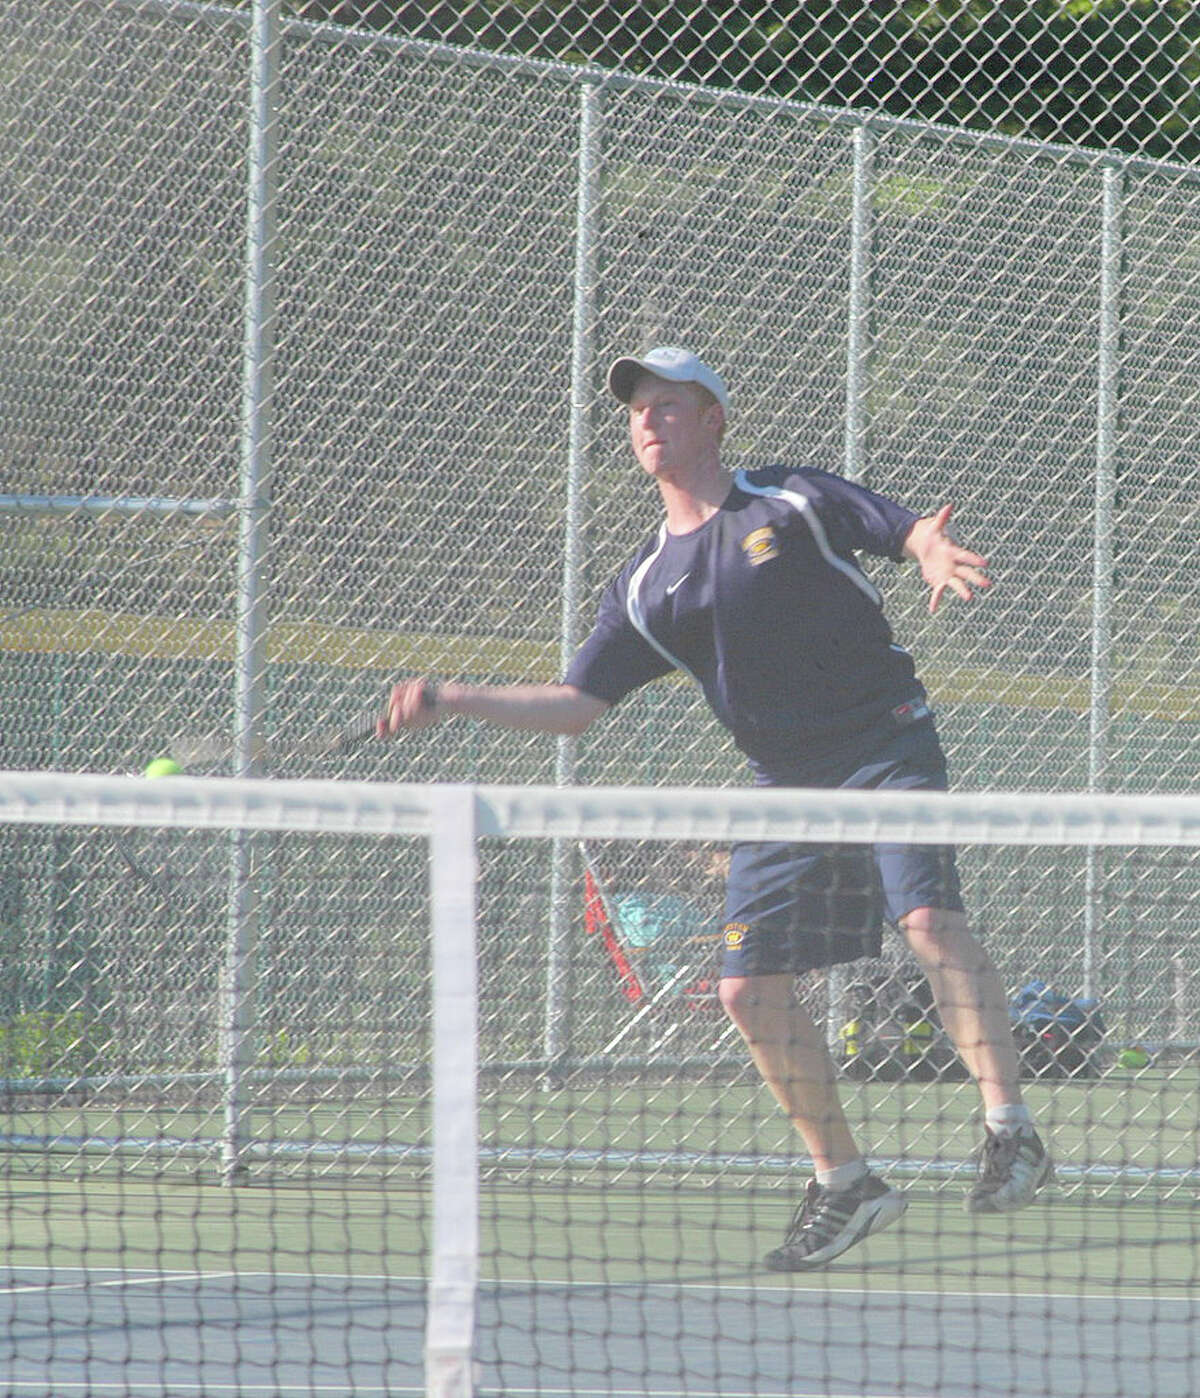 Weston junior Cameron Hagen lost 6-4, 7-6 (7-5) at first singles Monday in a 5-2 Trojan victory at Newtown.